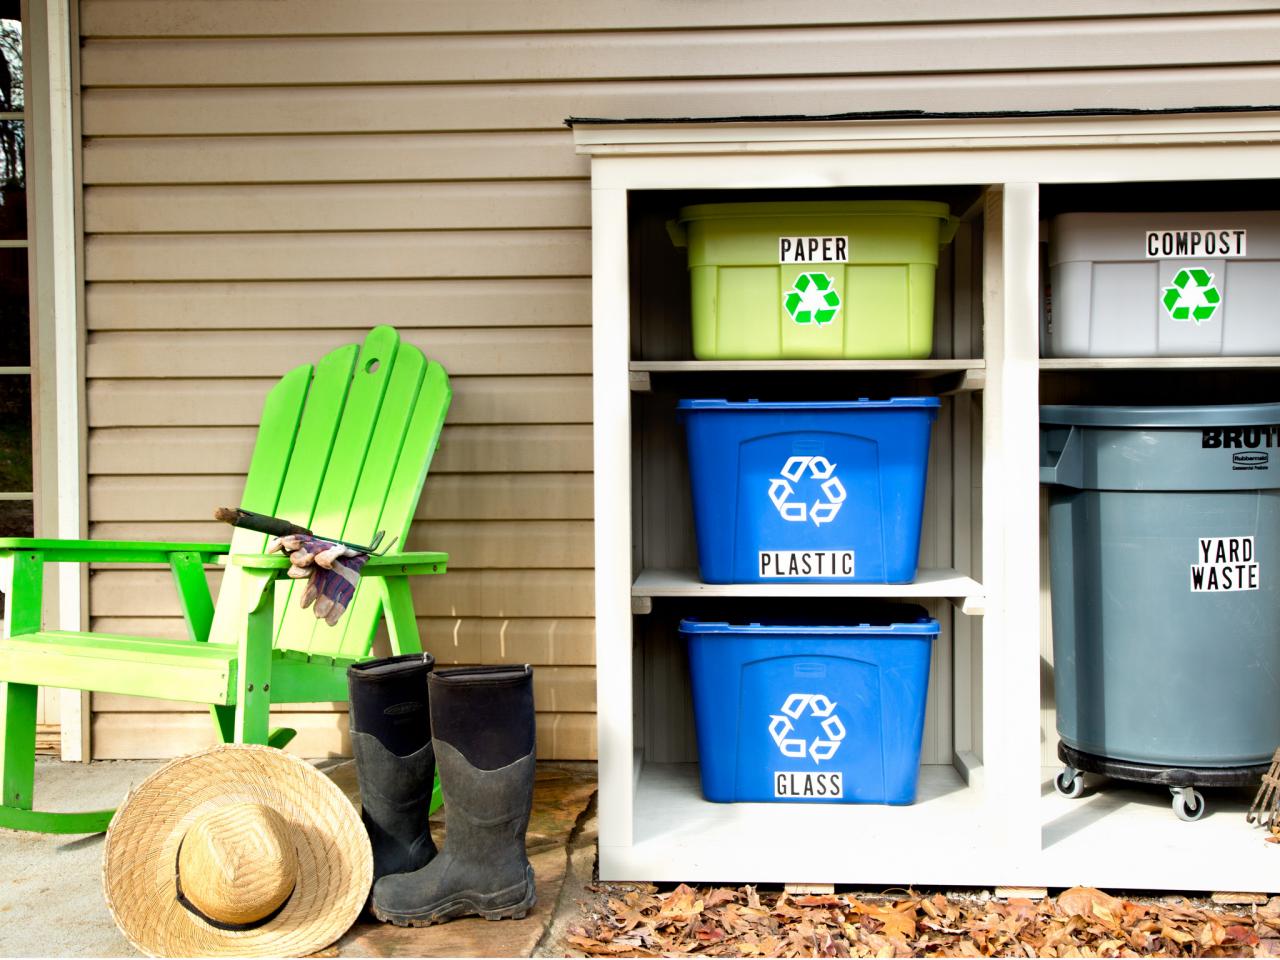 Where can you get recycling center bins?